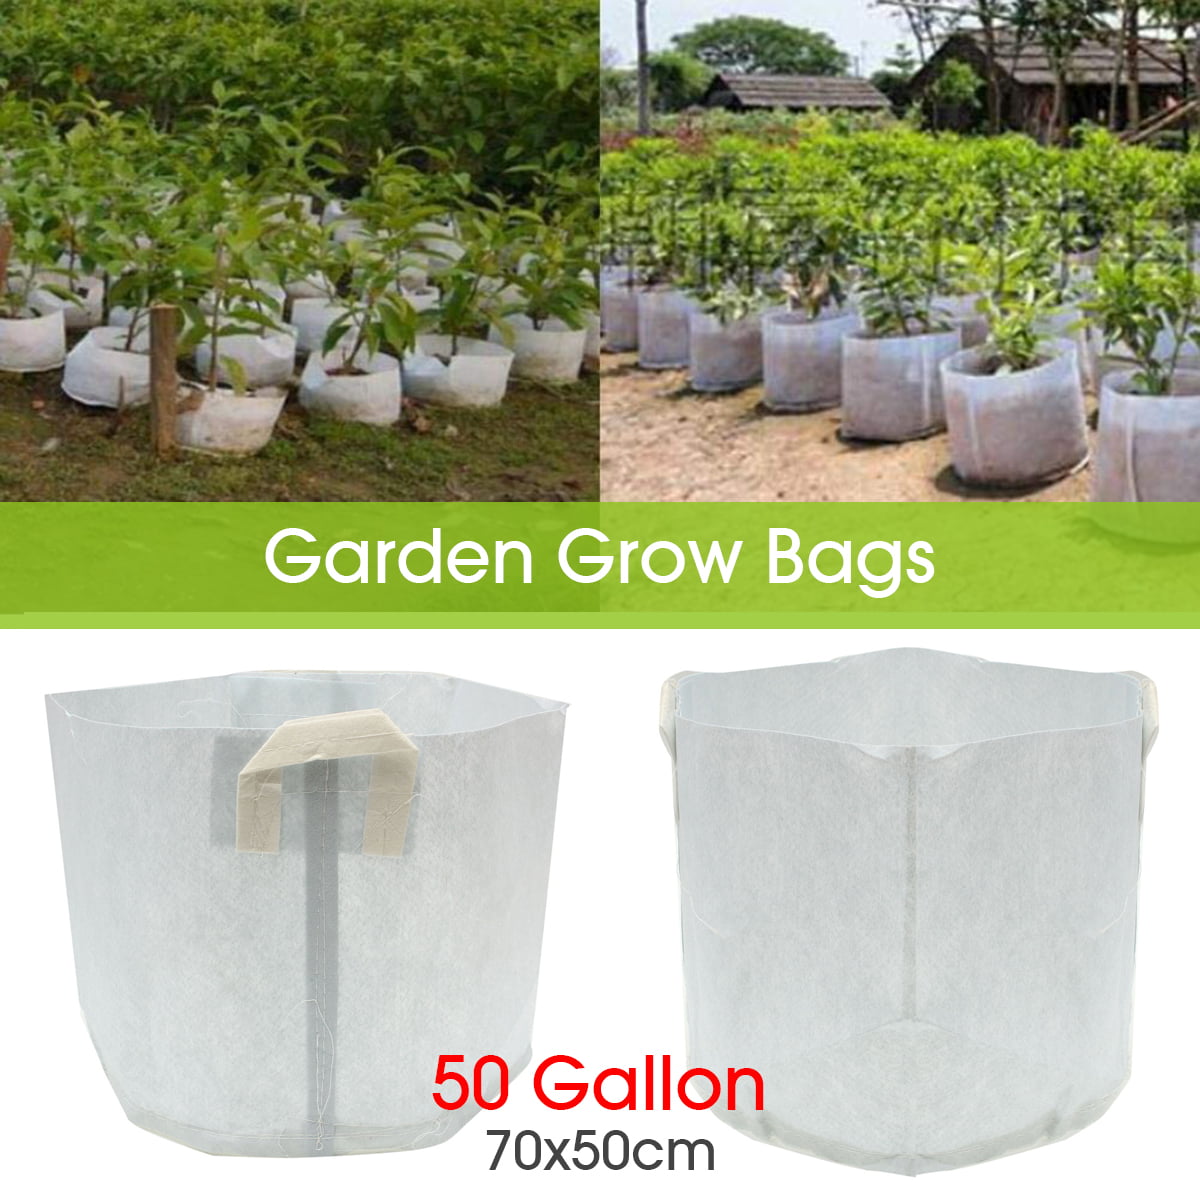 10 gallons Alnn 2PCS Potato Planting Grow Bags Waterproof Breathable Foldable Reusable Growning Bag Planter Gardening for Vegetable Strawberry Tomato Carrot Onion